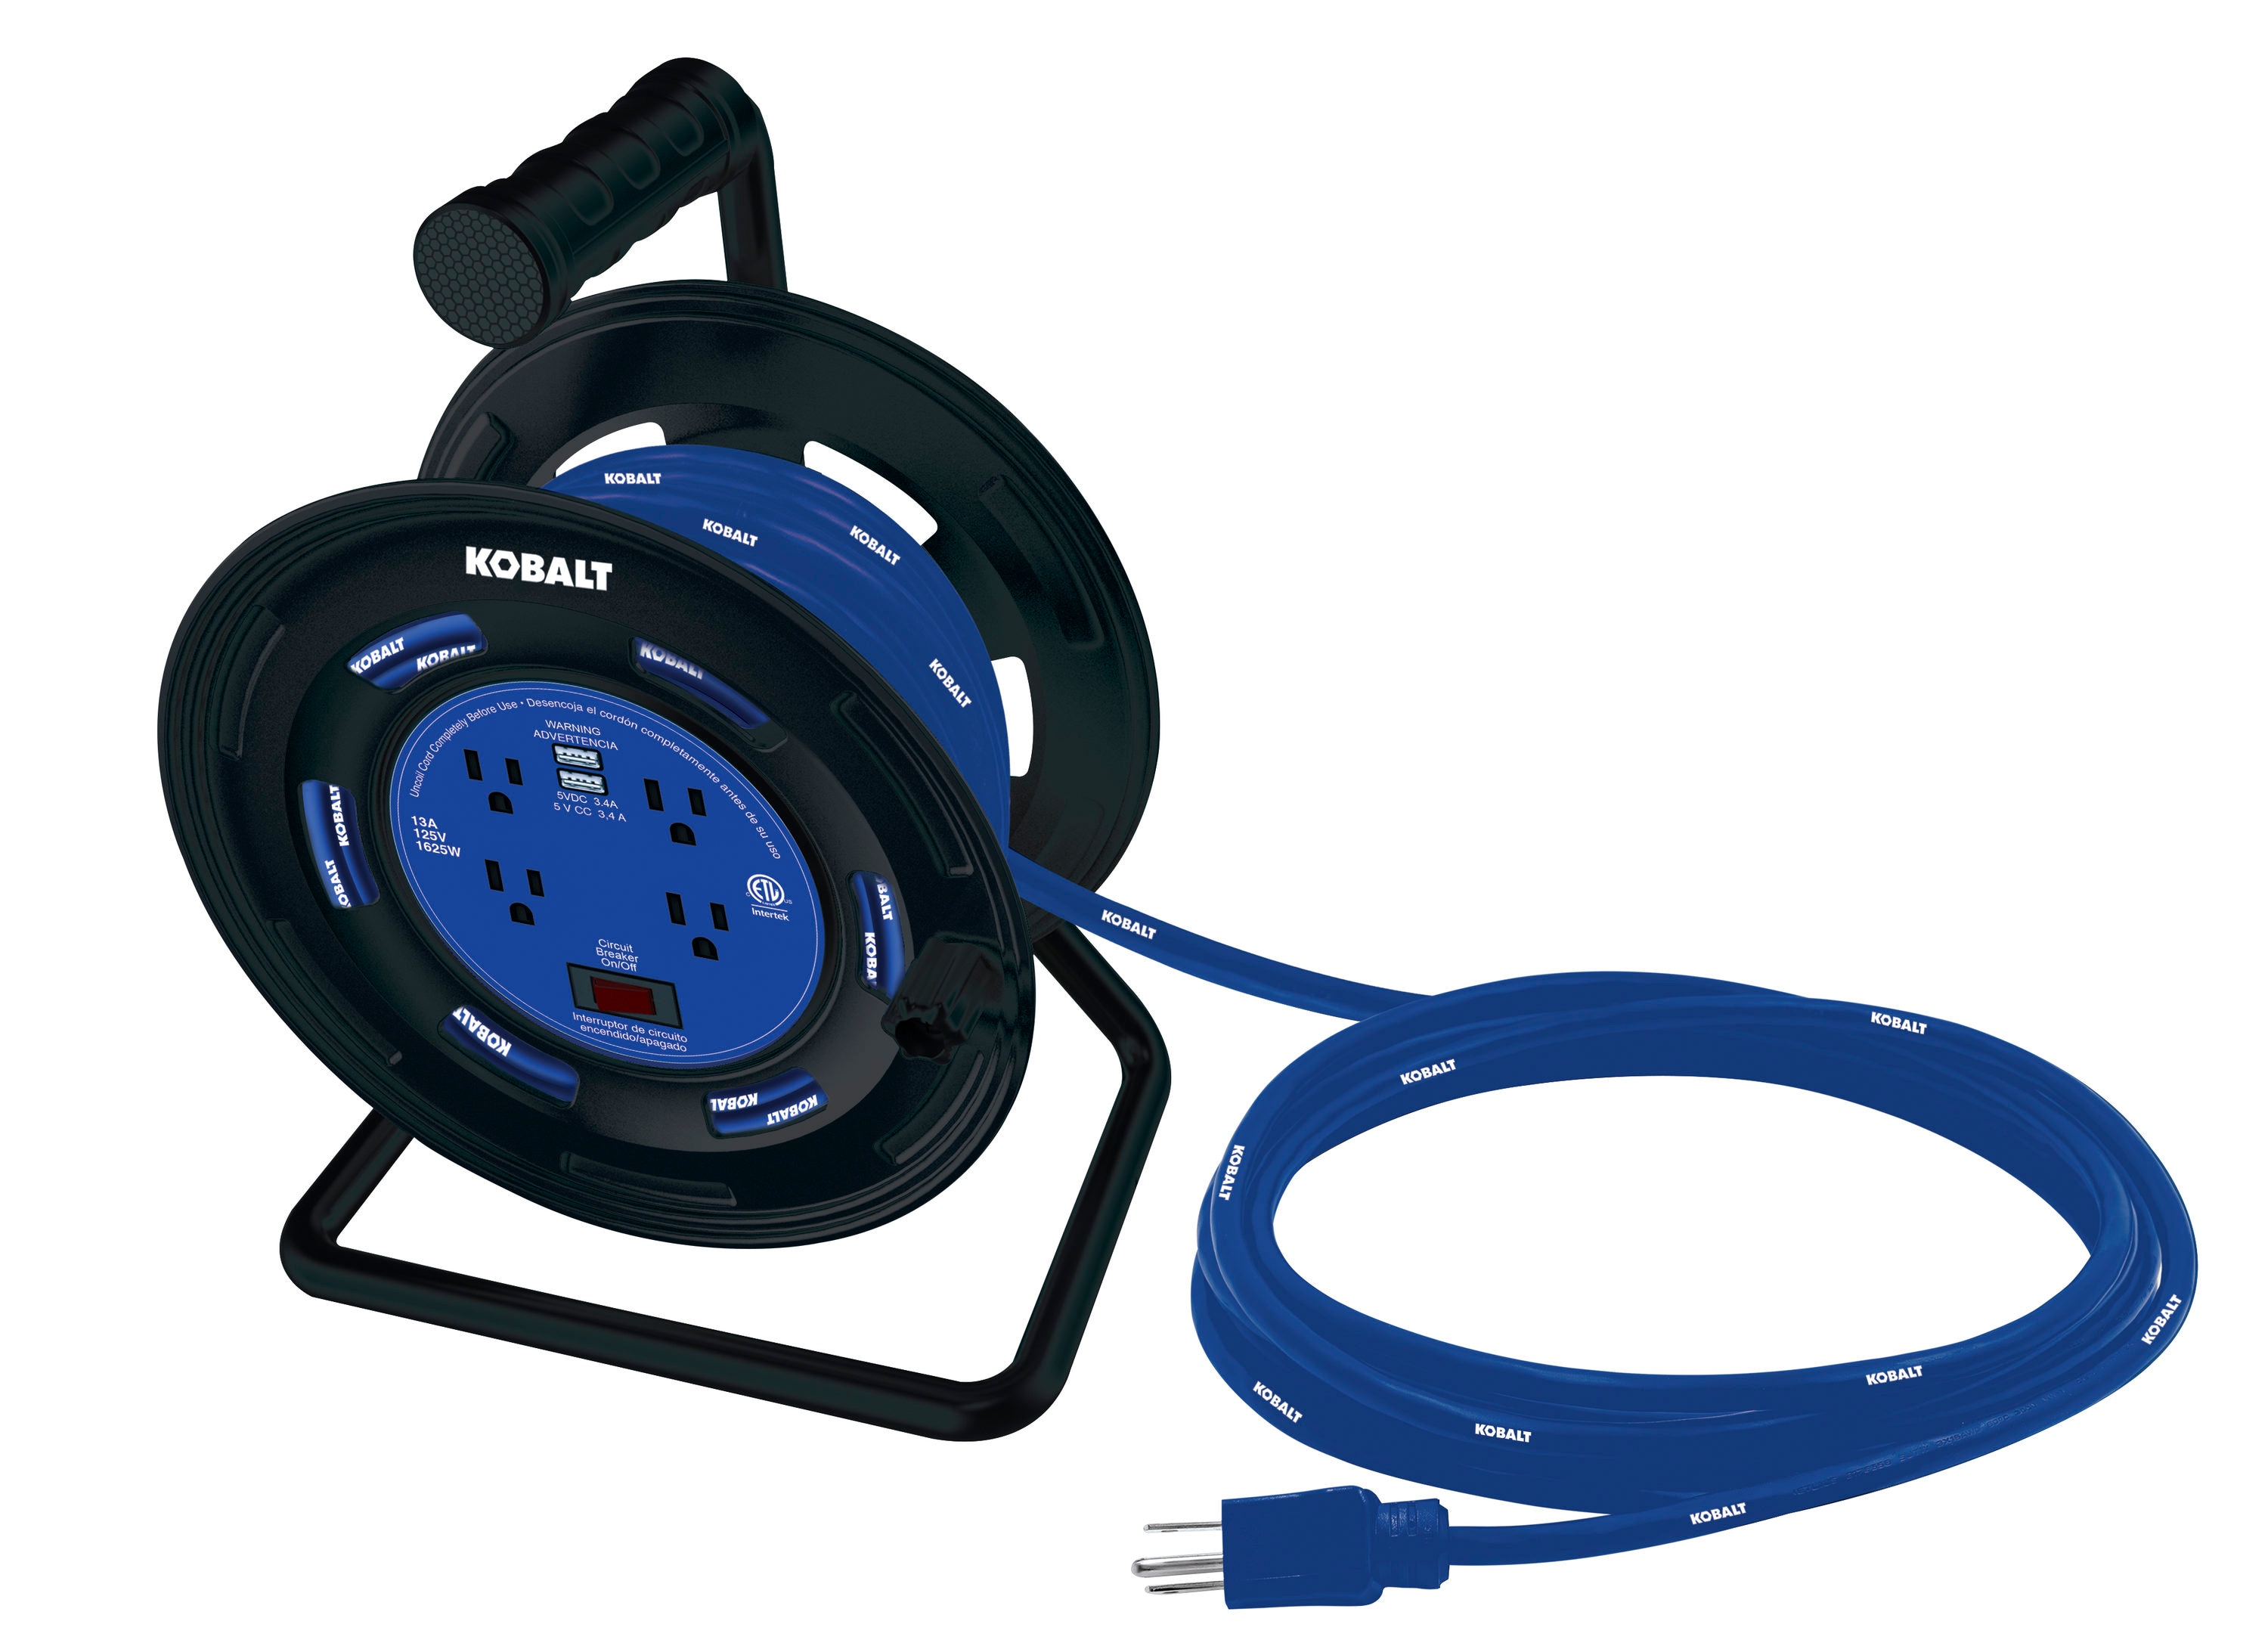 EXTENSION CORD ON REEL - Cable reel - Plugs and multisockets - Lyvia -  Arteleta International S.p.A. - Components, materials and electrical items